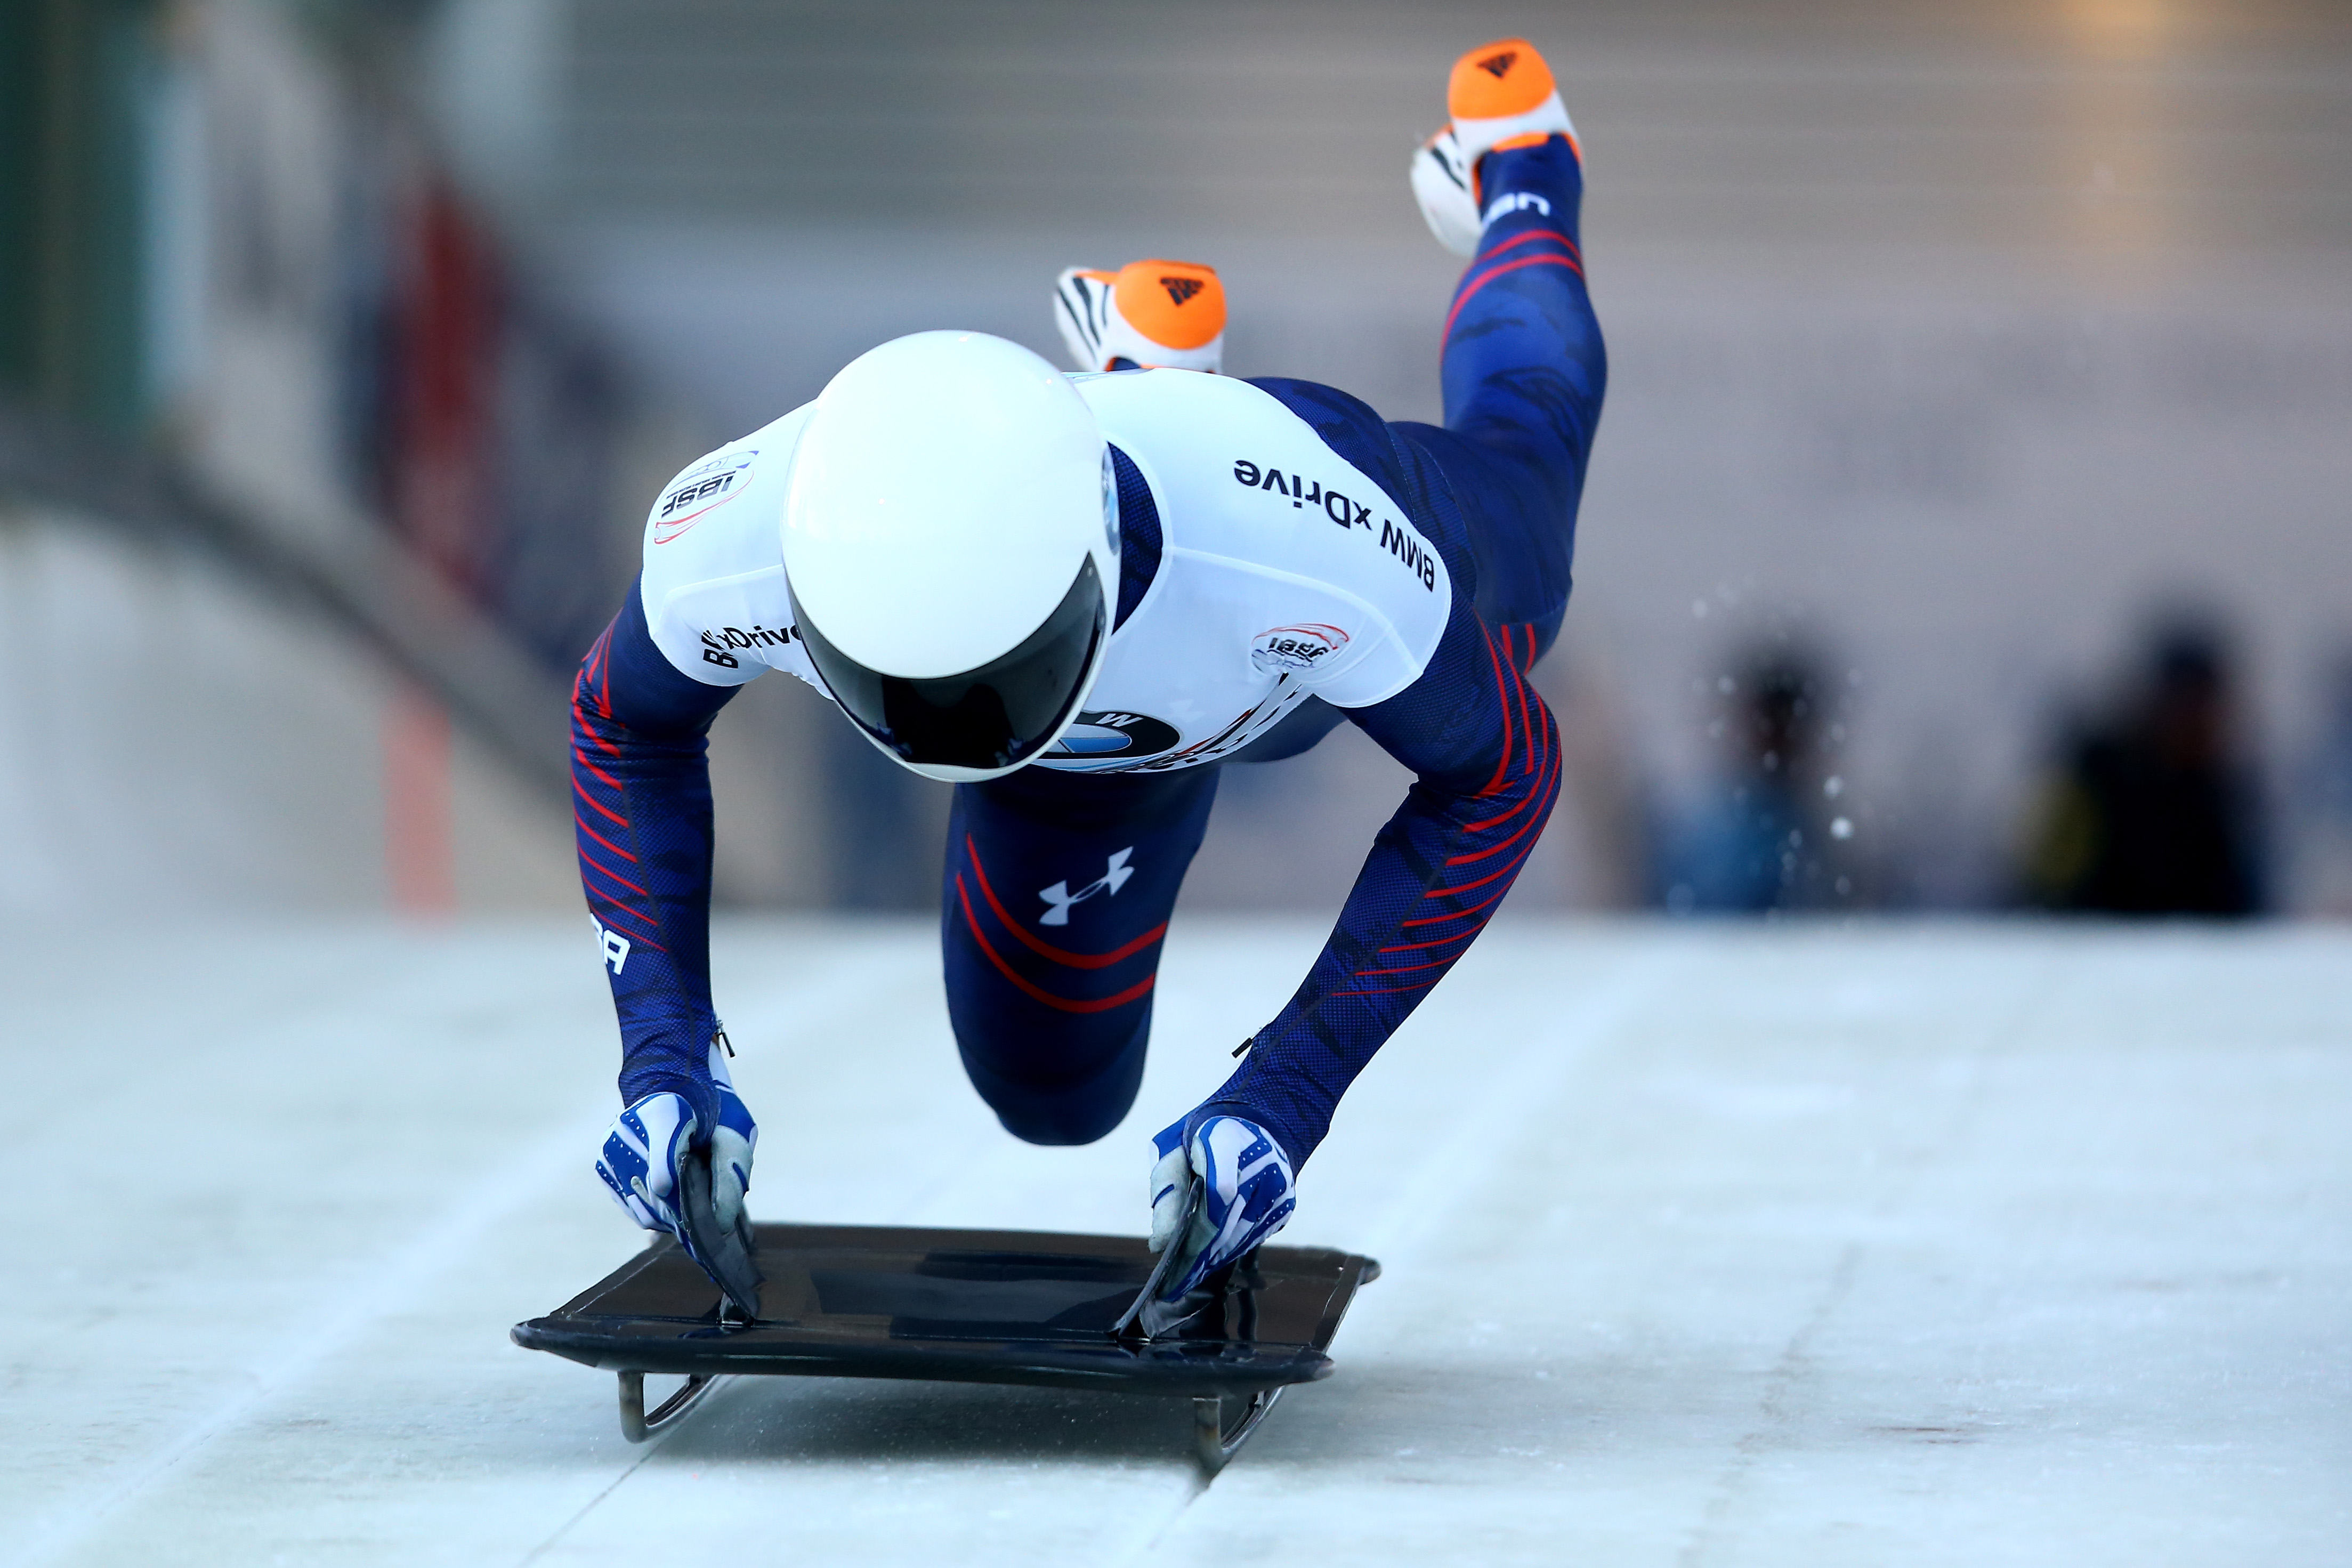 Matthew Antoine of United States competes in his first run of the men's skeleton competition during the BMW IBSF Bob &amp; Skeleton Worldcup at Veltins Eis-Arena on December 4, 2015 in Winterberg, Germany. Christof Koepsel—Bongarts/Getty Images. (Christof Koepsel—Bongarts/Getty Images.)